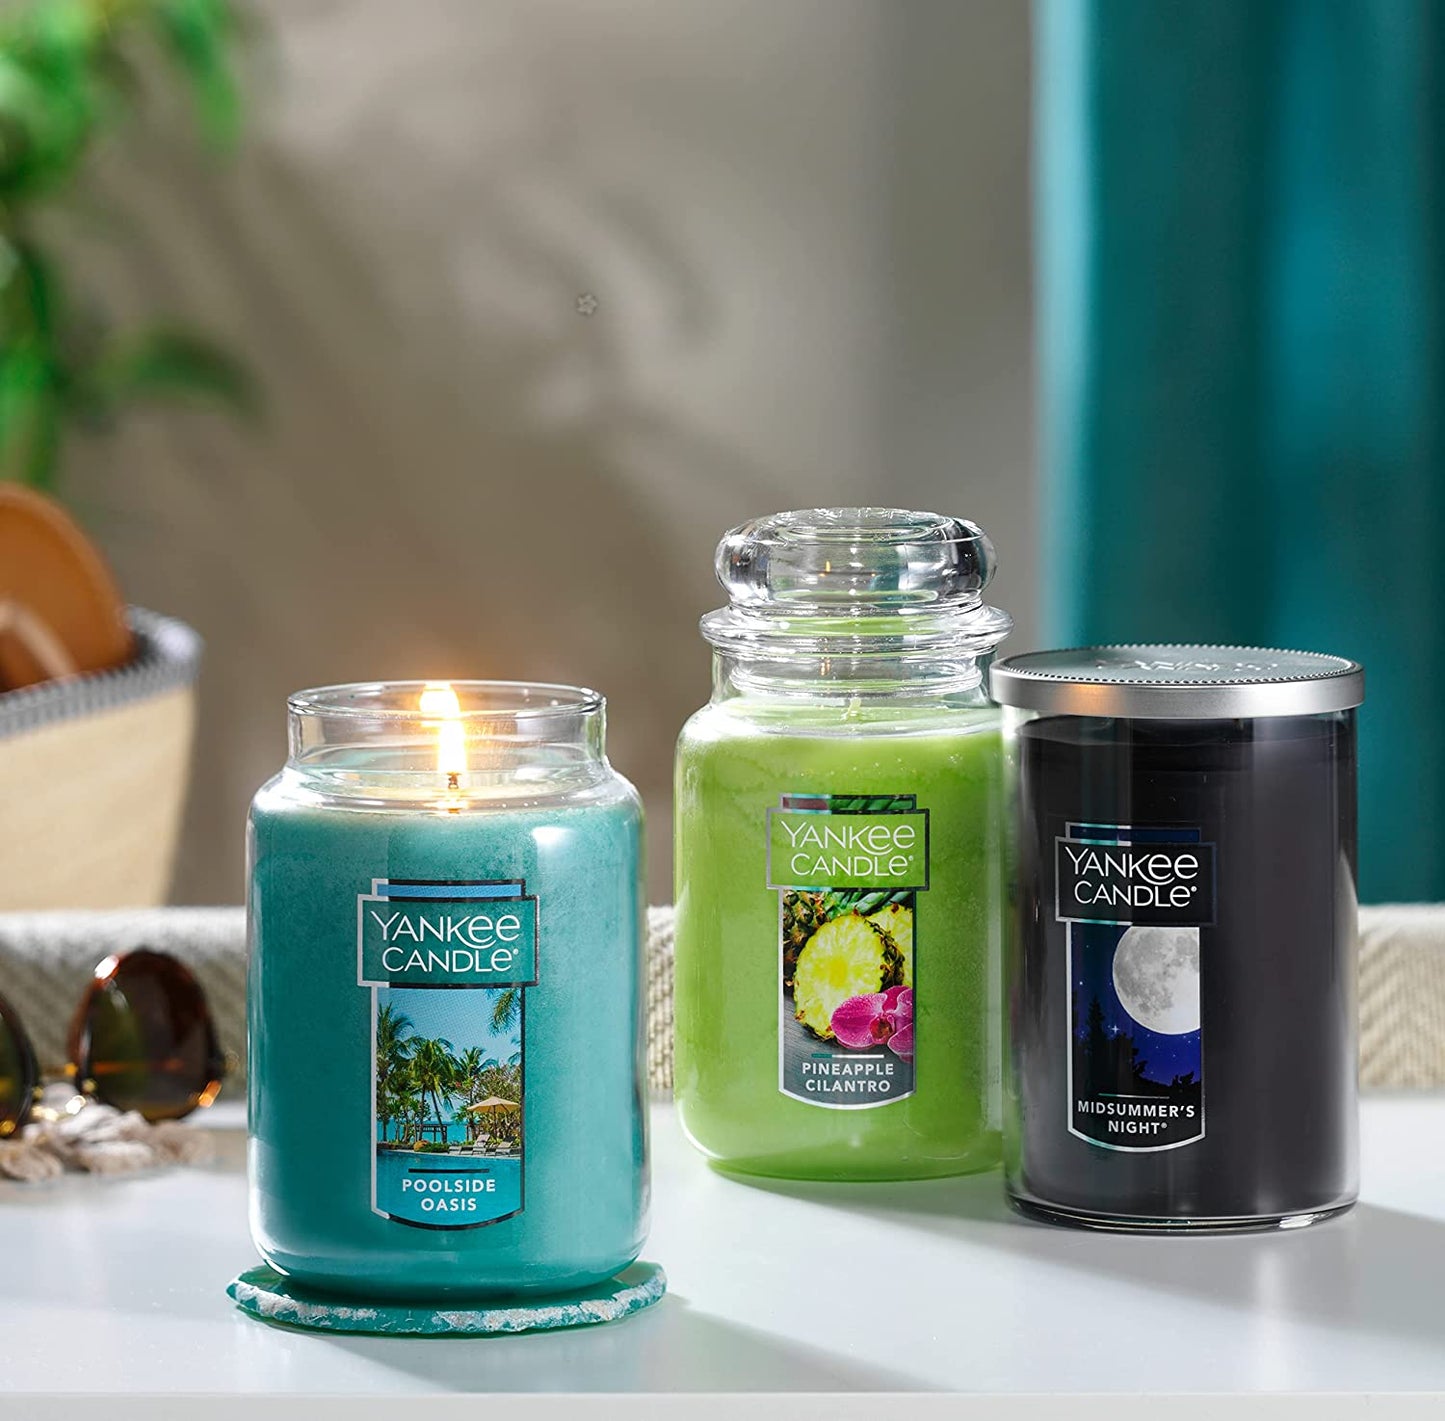 Midsummer'S Night Scented, Classic 22Oz Large Tumbler 2-Wick Candle, over 75 Hours of Burn Time